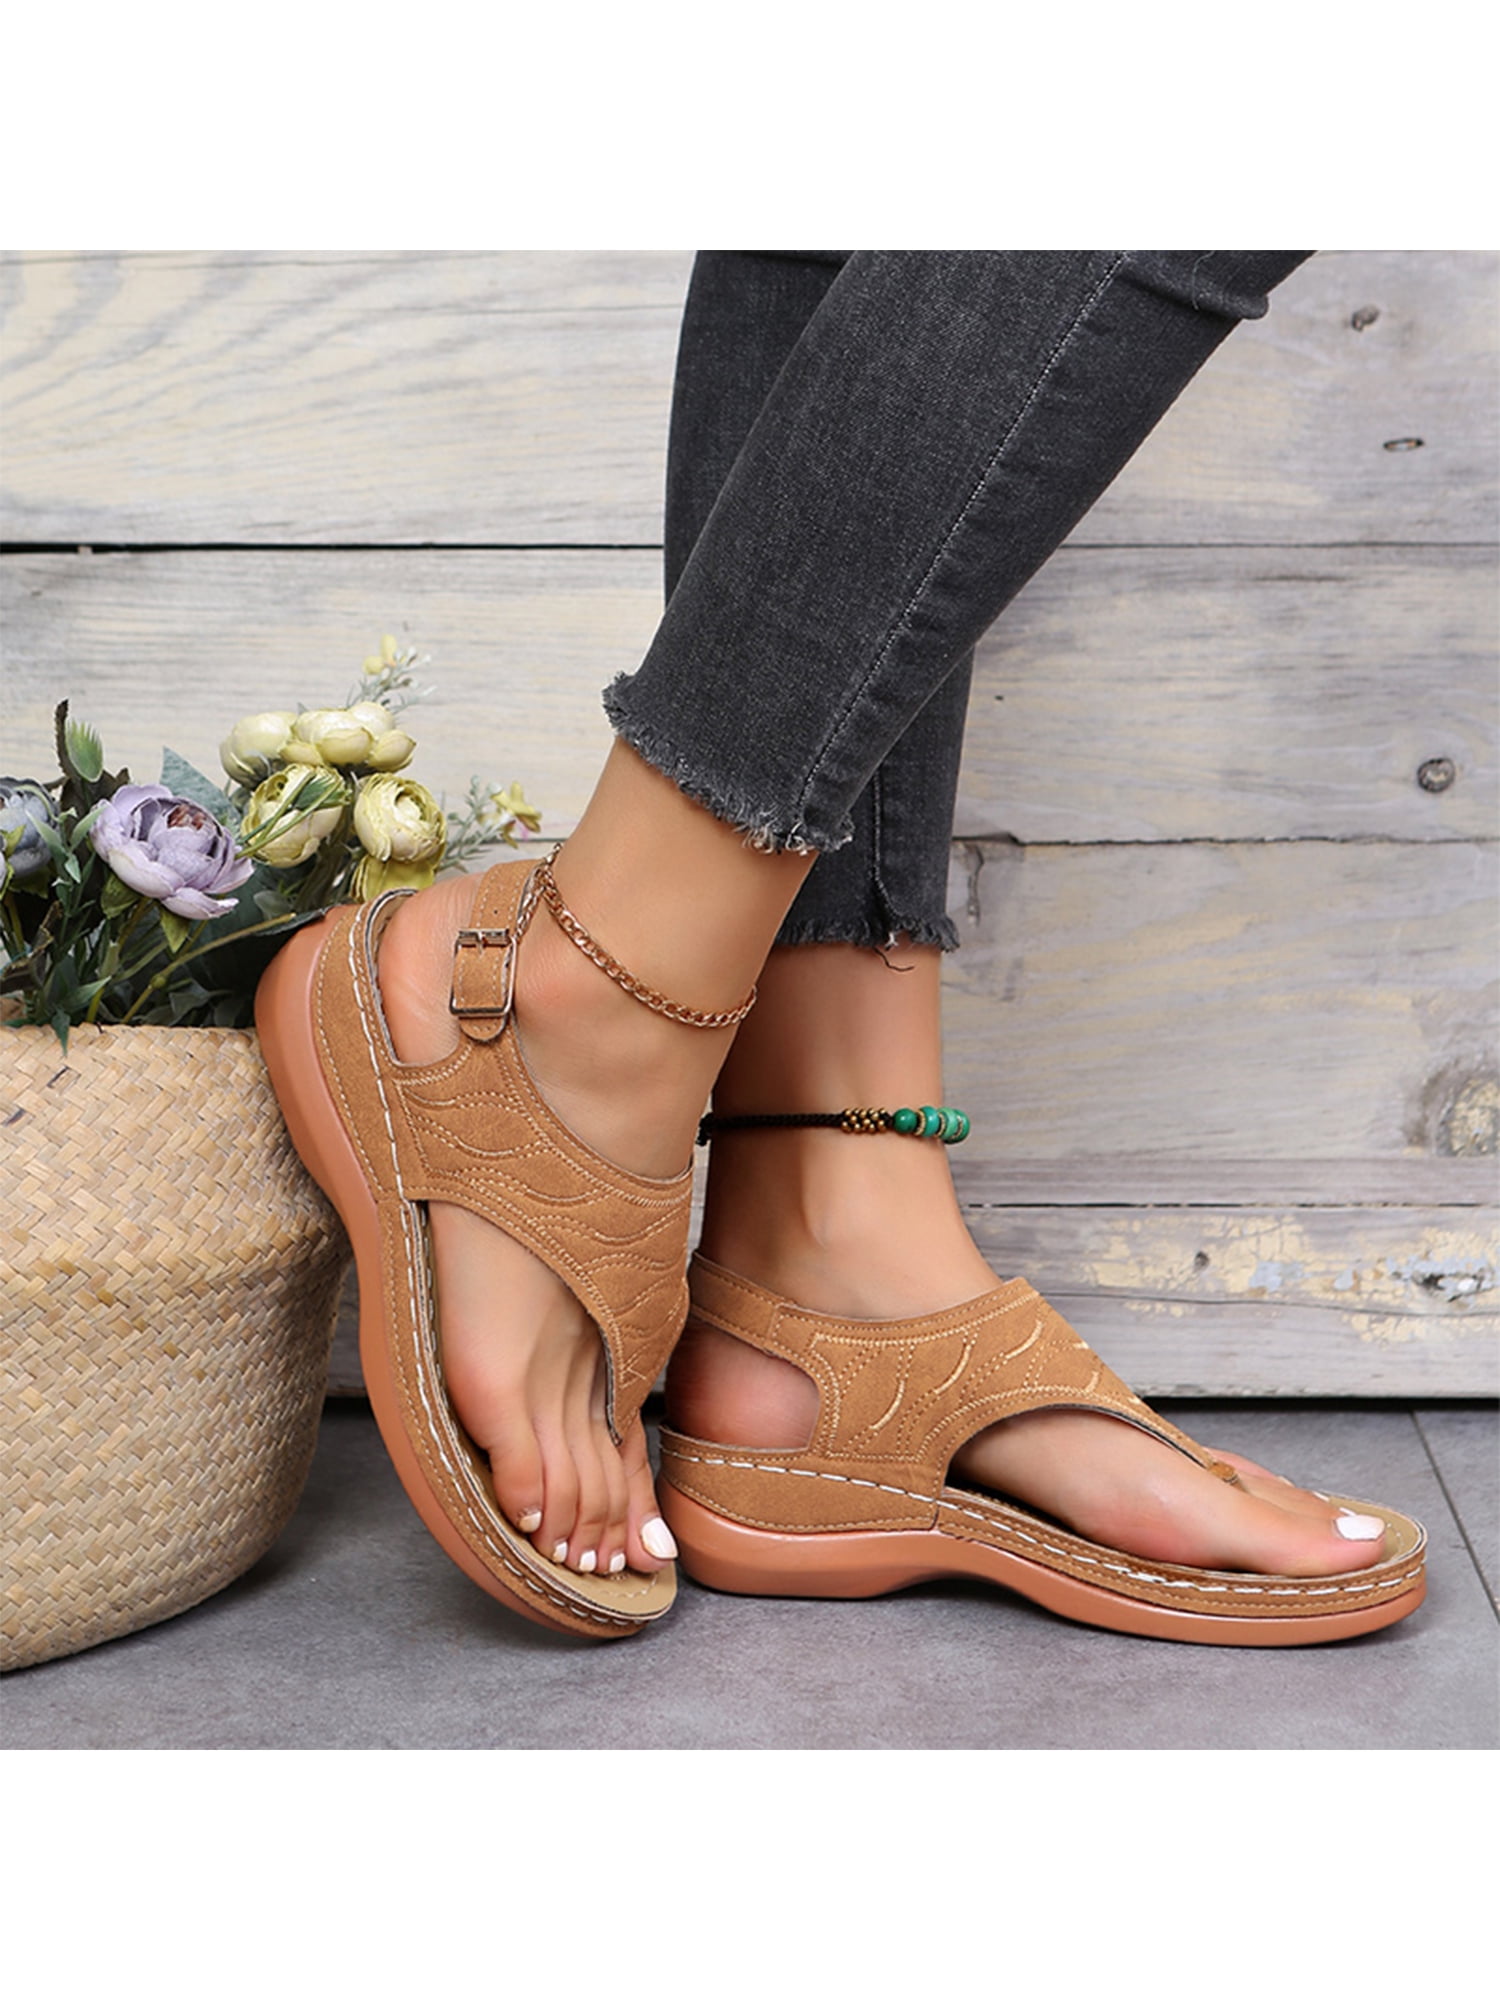 dress sandals with arch support